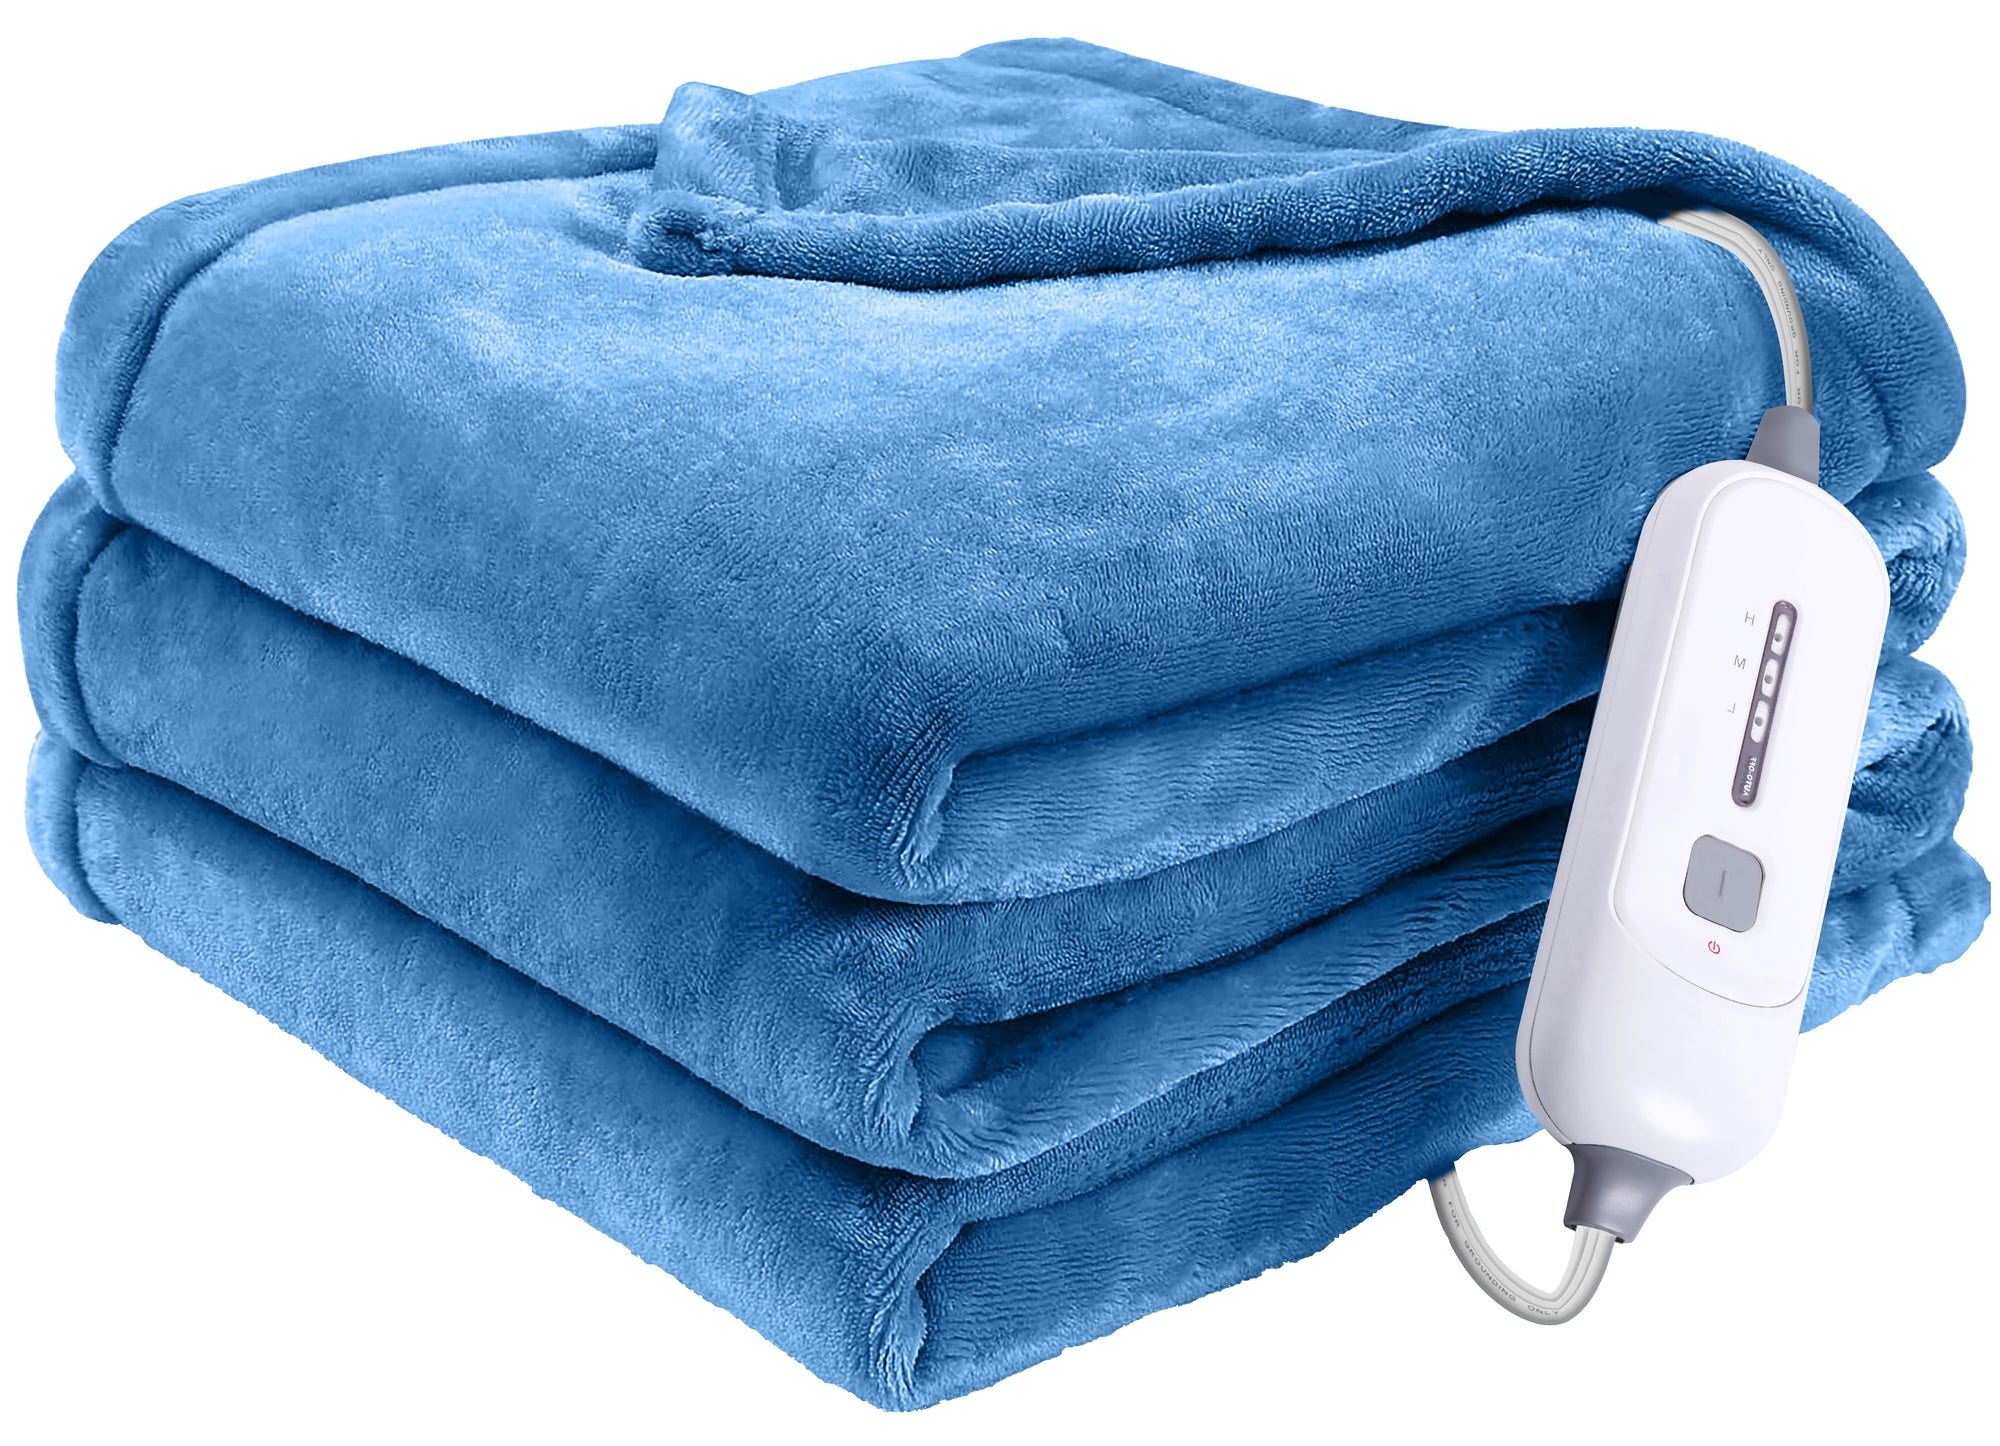 Shop Our Heated Blanket Blue 72"x84" On Amazon